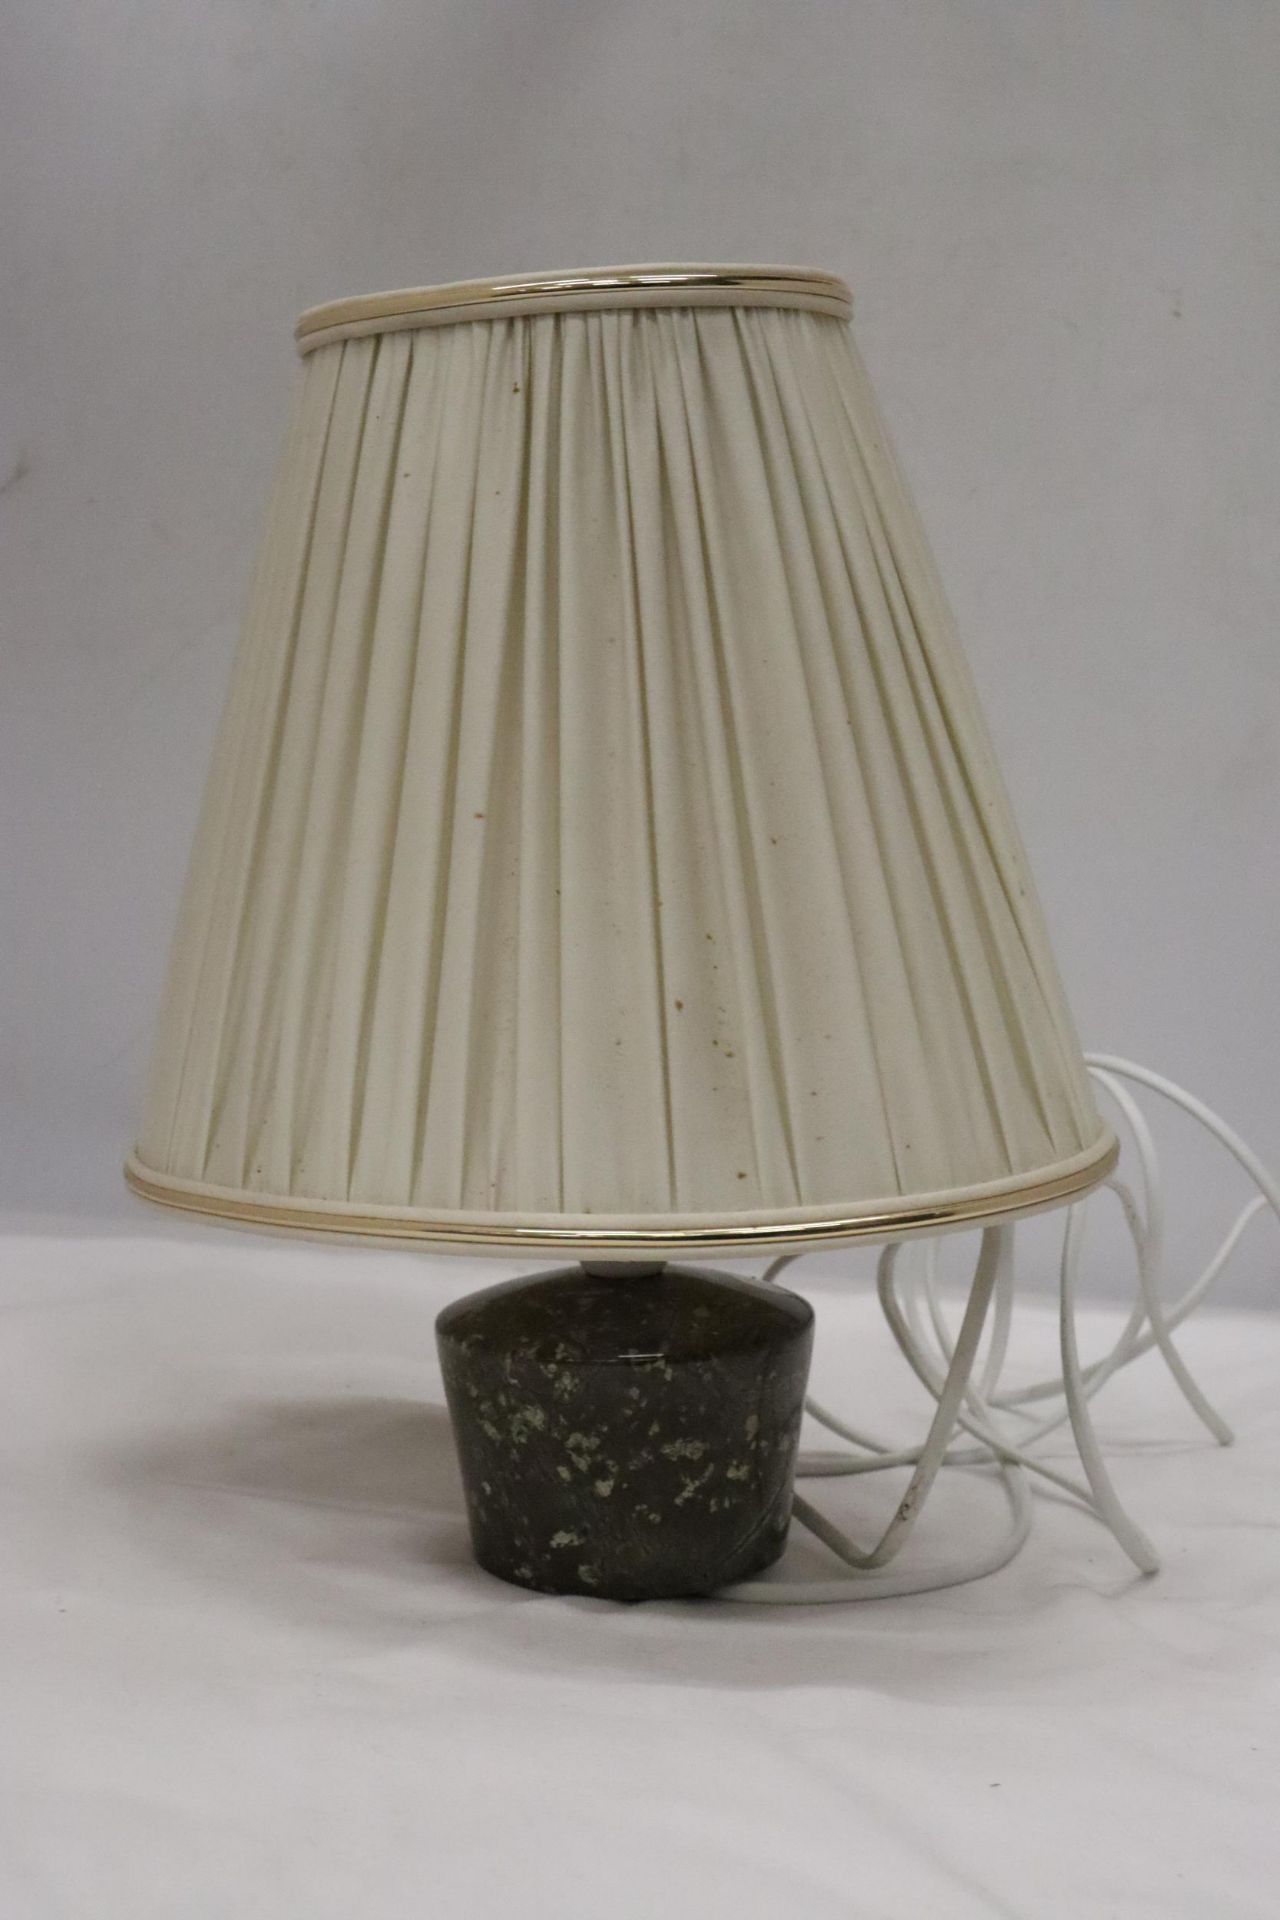 A TABLE LAMP WITH A POSSIBLY GRANITE BASE AND SHADE, HEIGHT 32CM